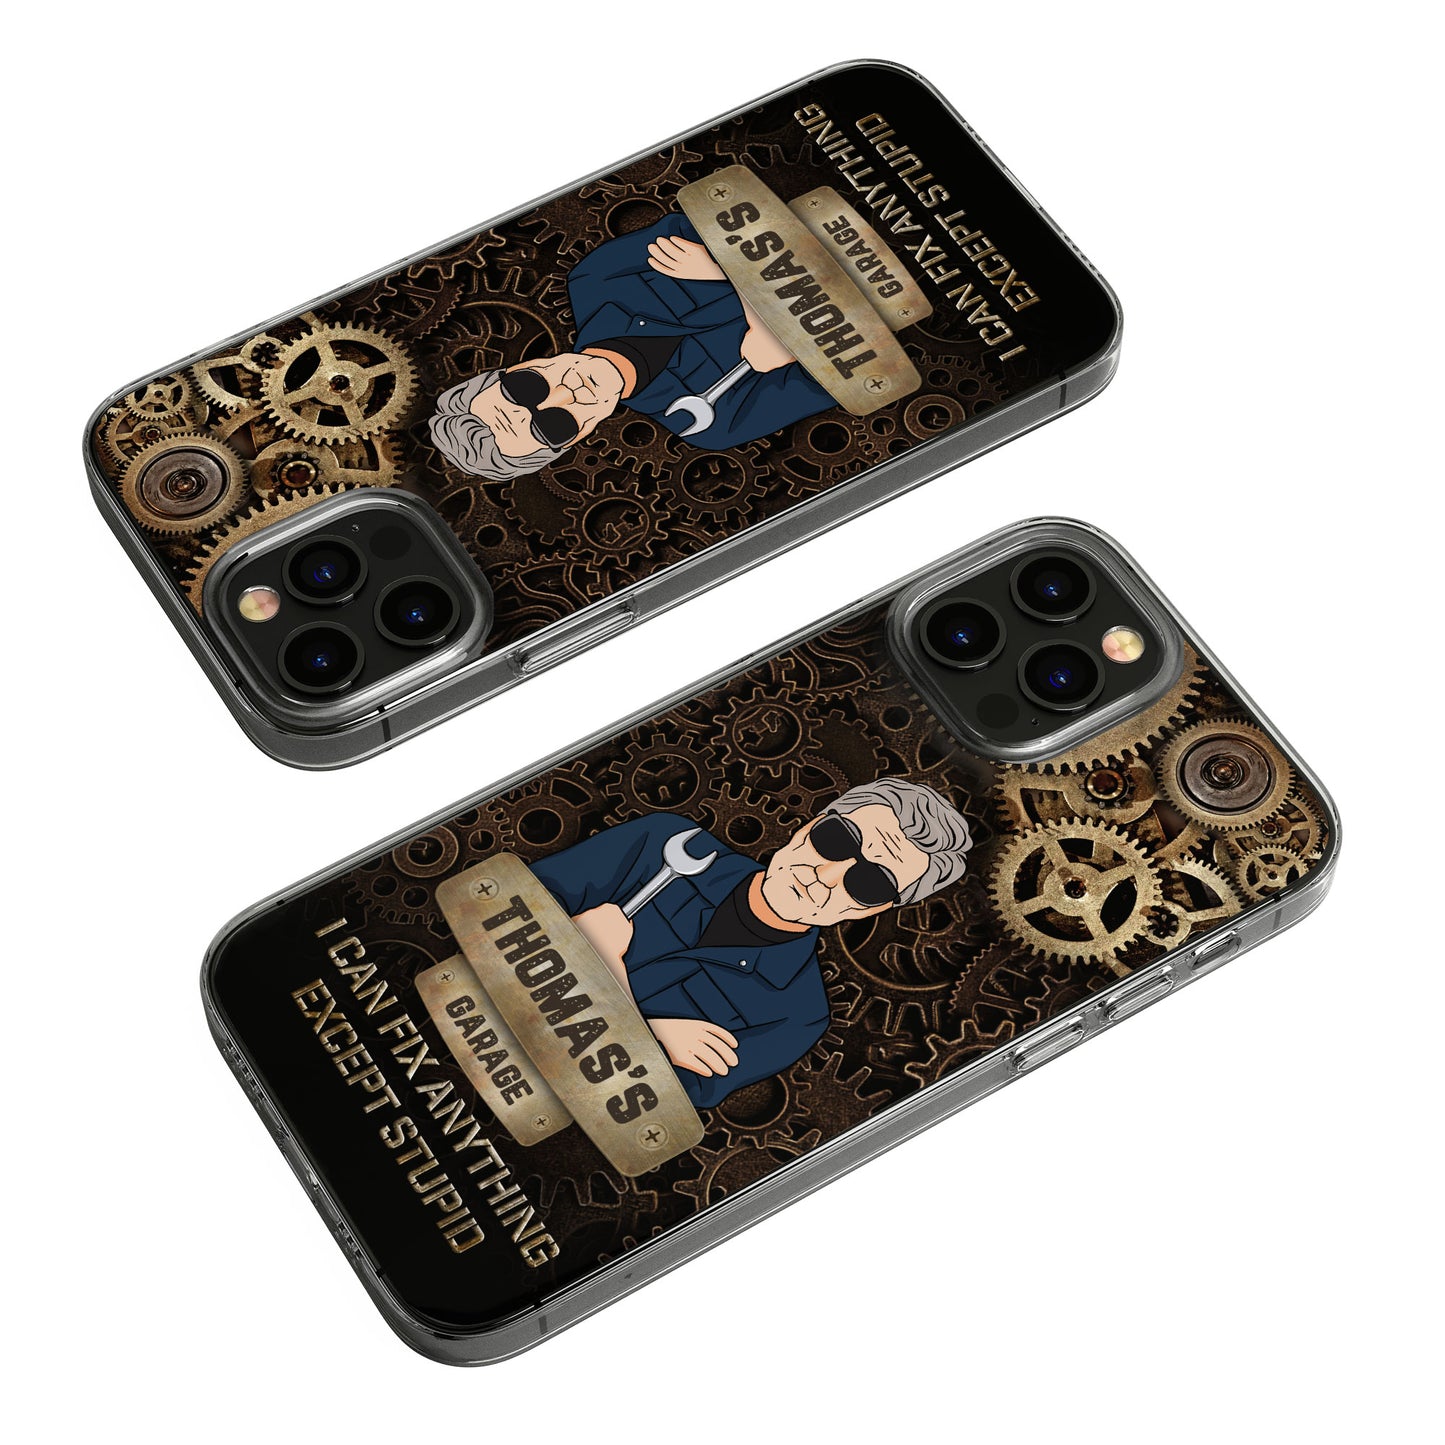 Dad' Garage - Personalized Clear Phone Case